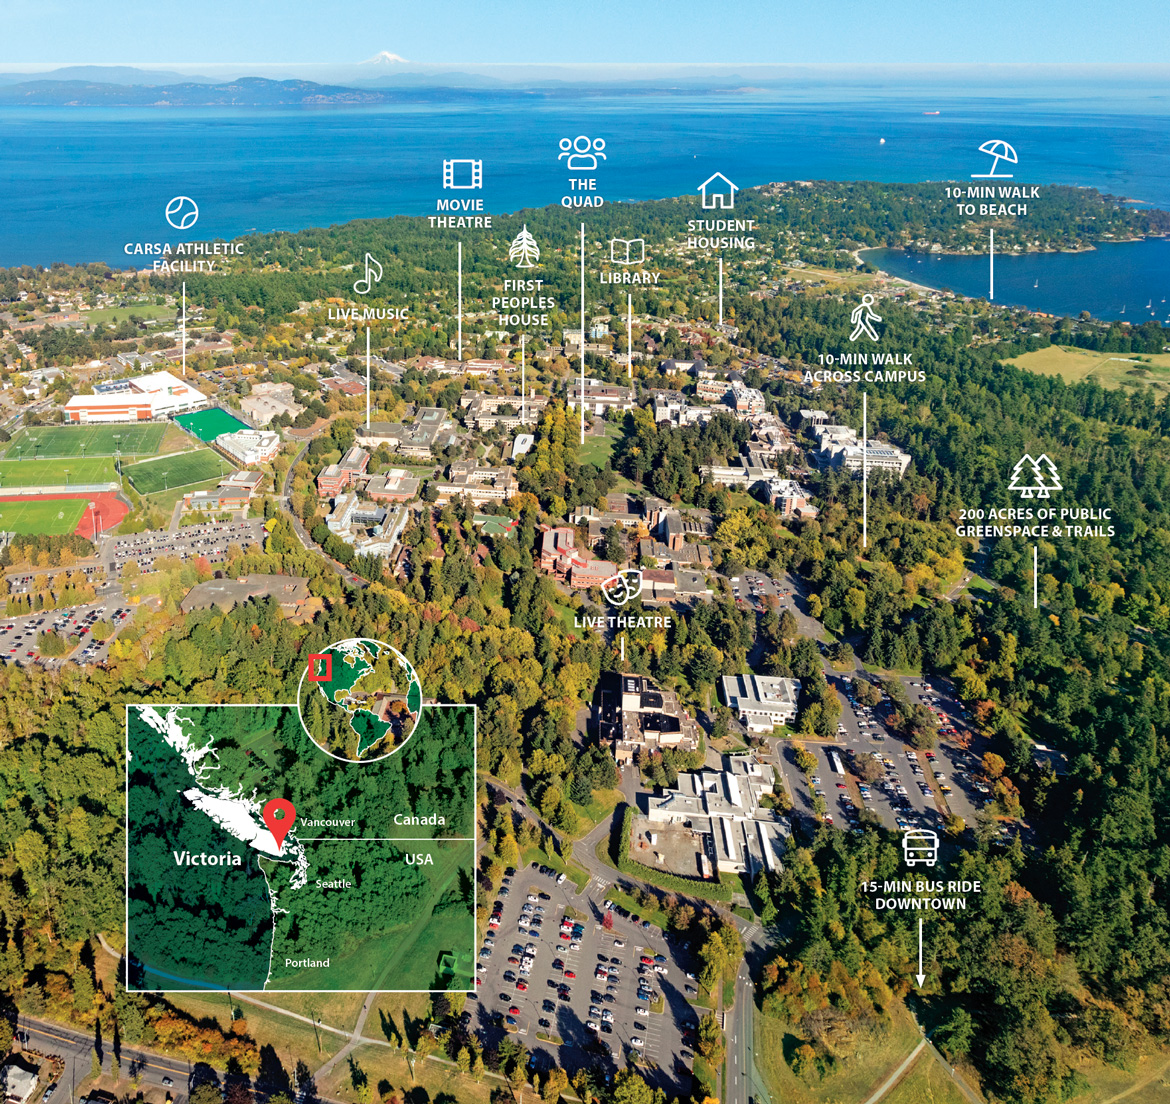 Detailed aerial map of the UVic campus, showing that campus is located right on the scenic ocean and that there are many amenities within walking distance.